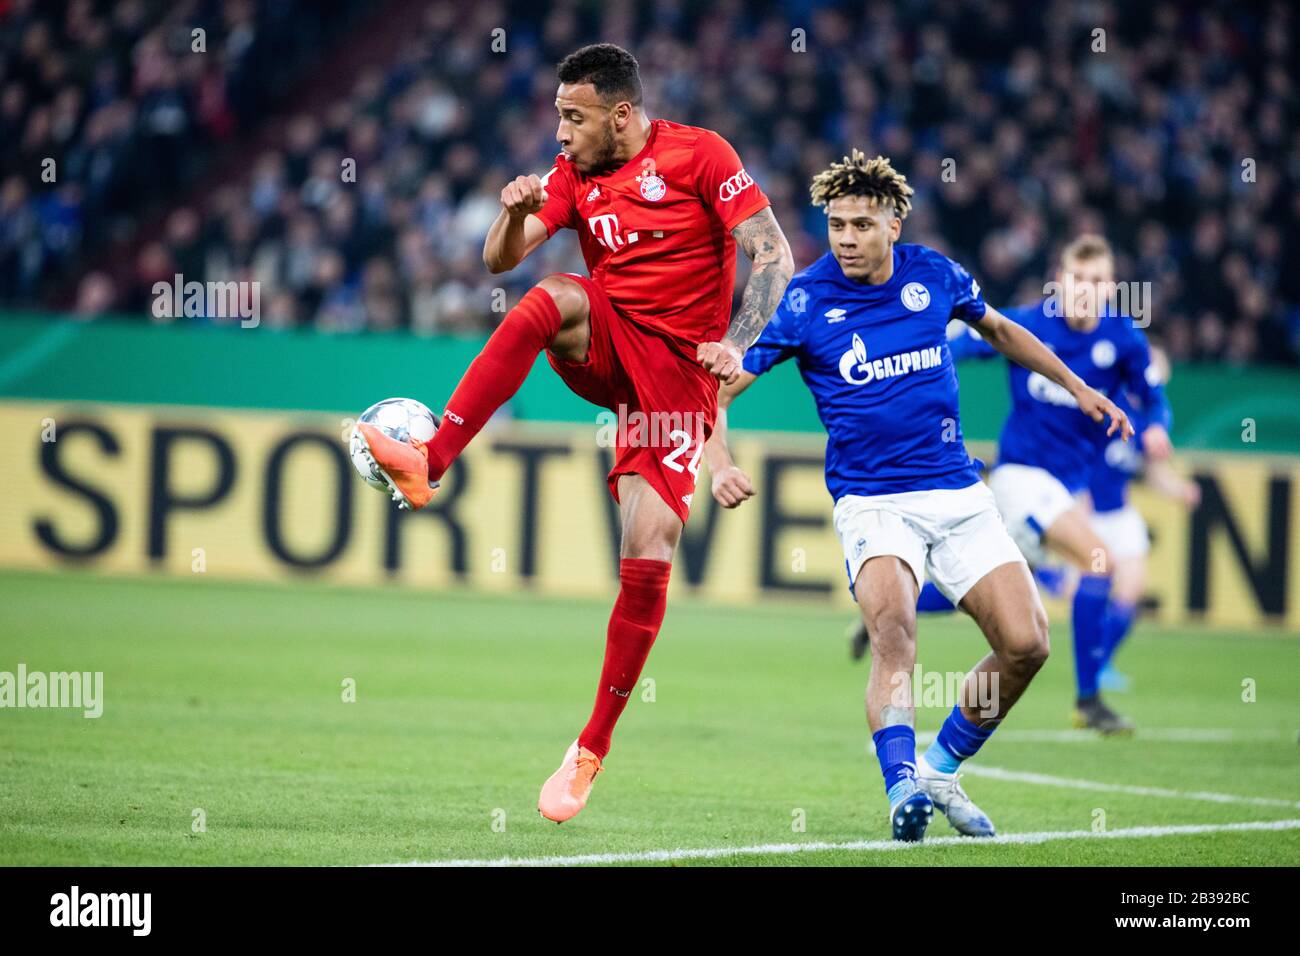 Gelsenkirchen, Germany, Veltins-Arena, 3.03.2020: Tolisso Corentin of Muenchen (L) assist the bal, against Jean-Clair Todibo of Schalke 04 during the Stock Photo